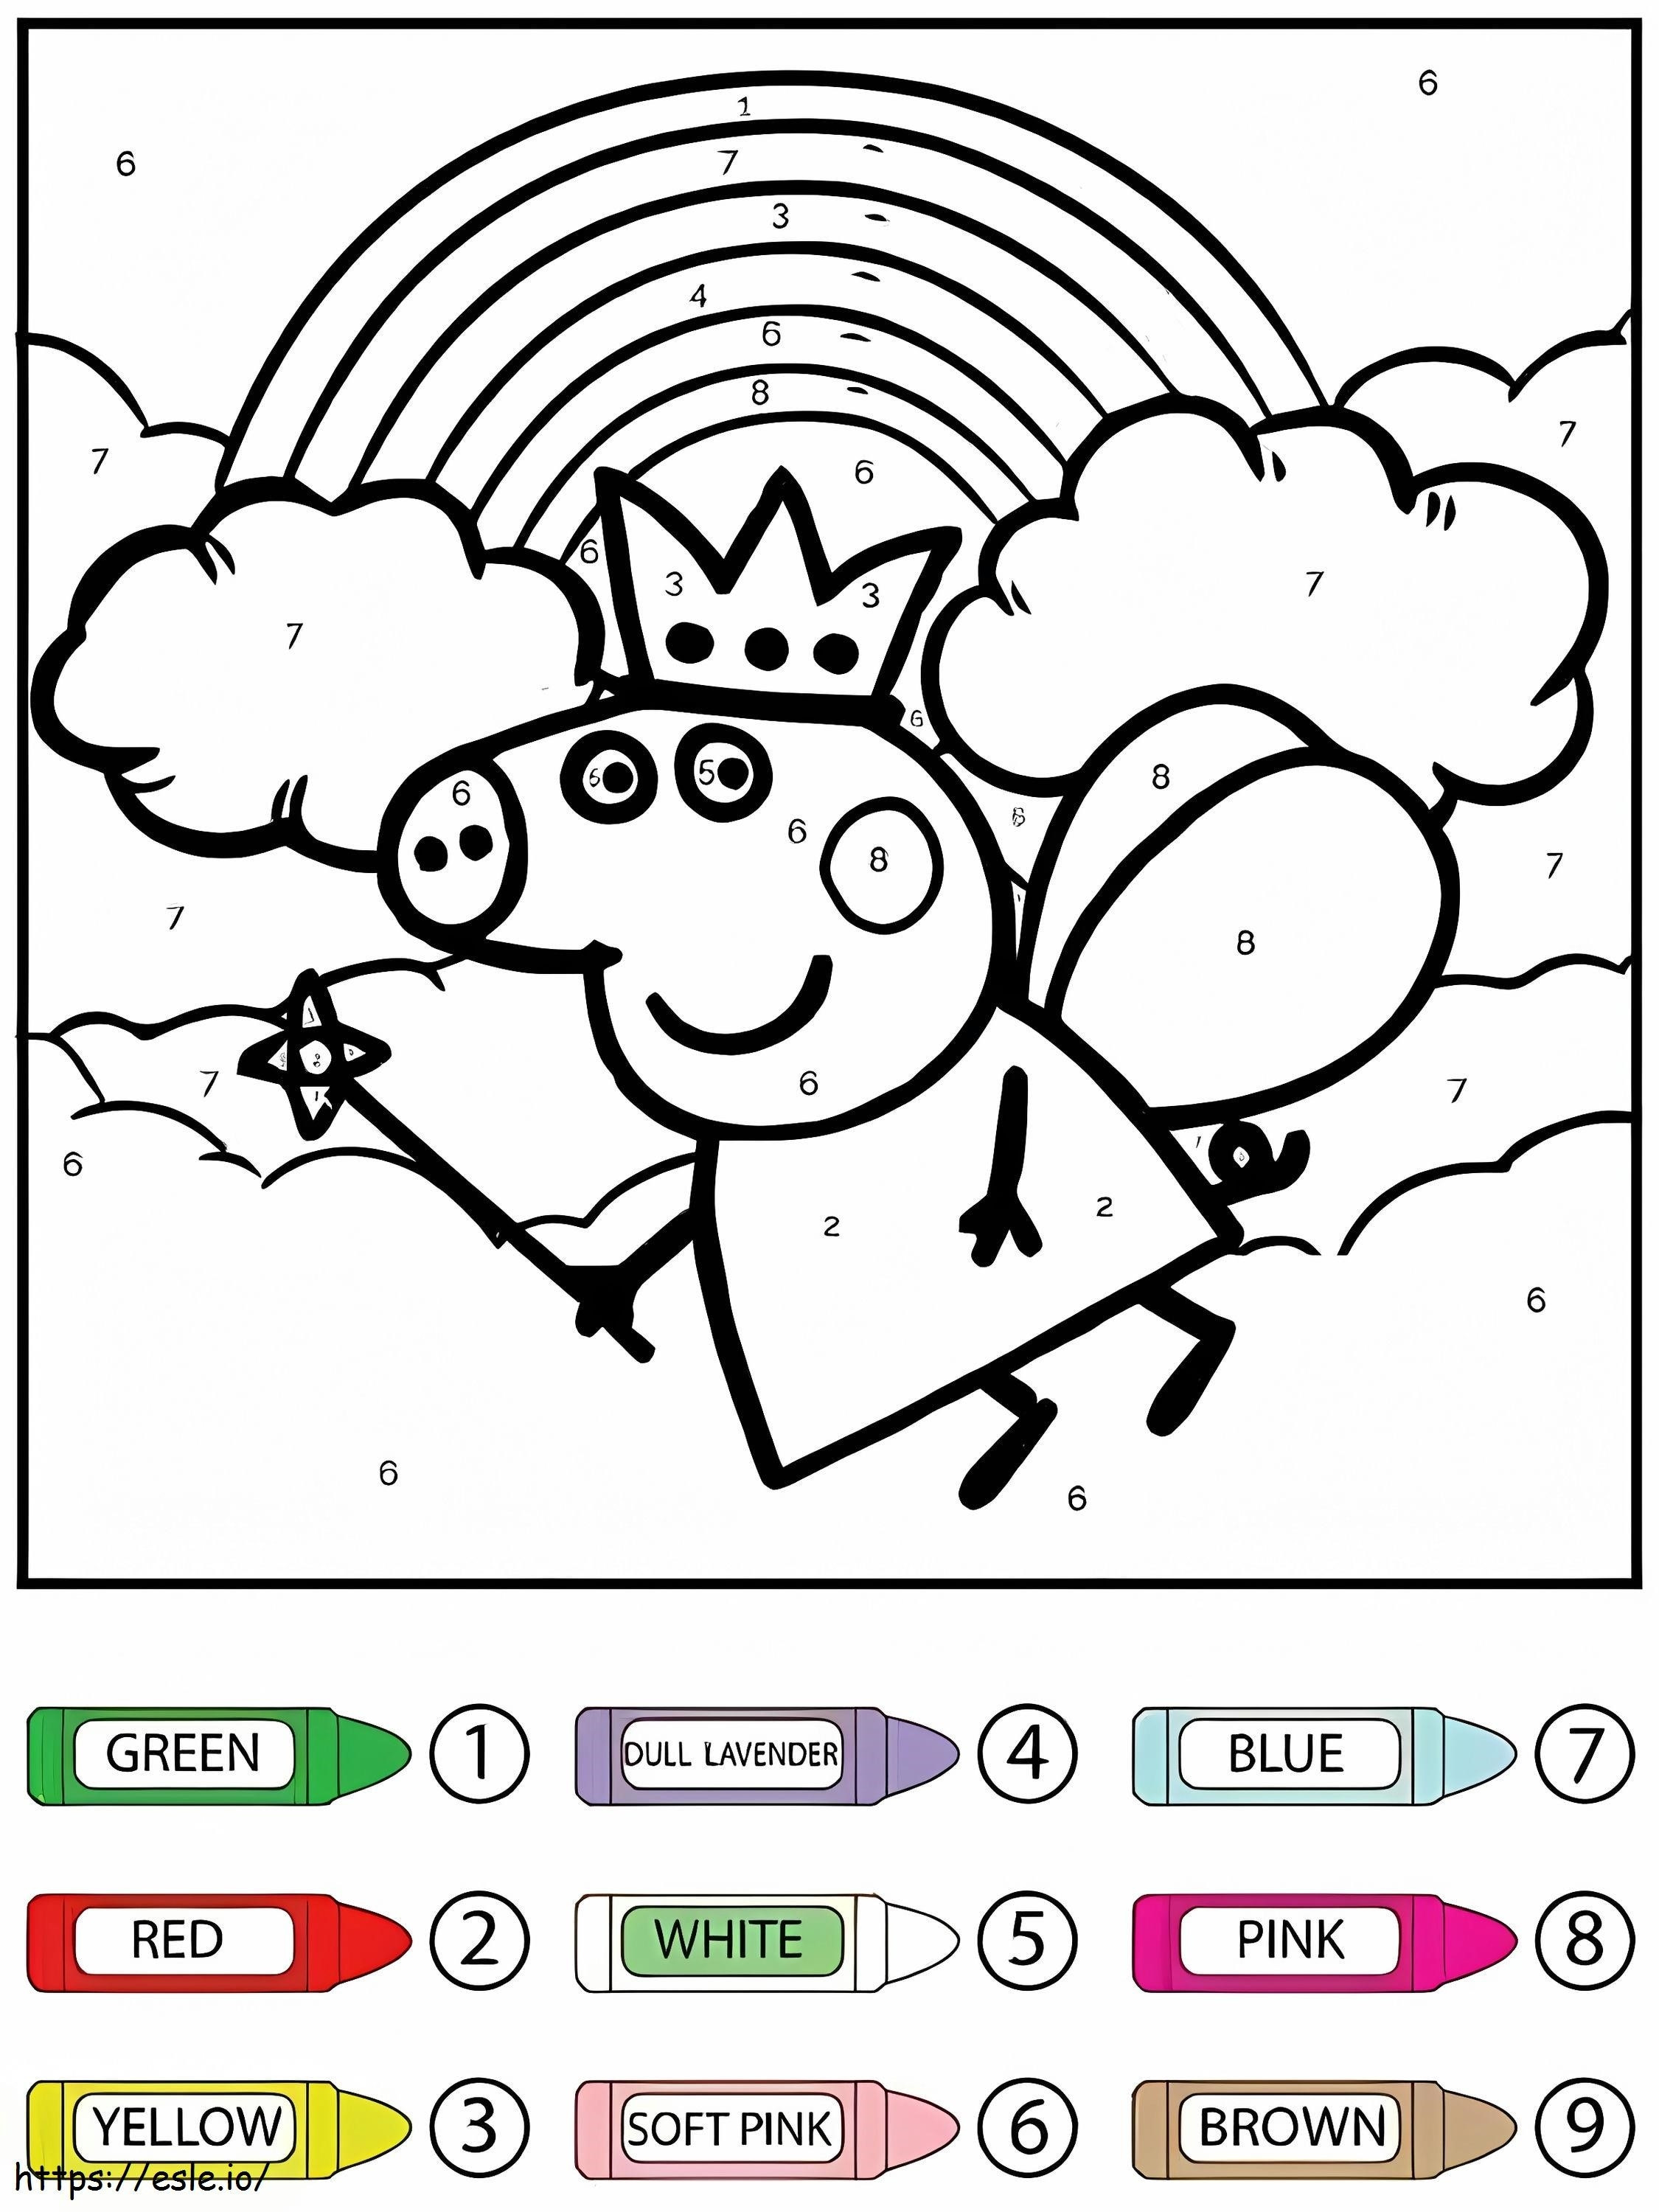 Flying Queen Peppa Pig Color By Number coloring page